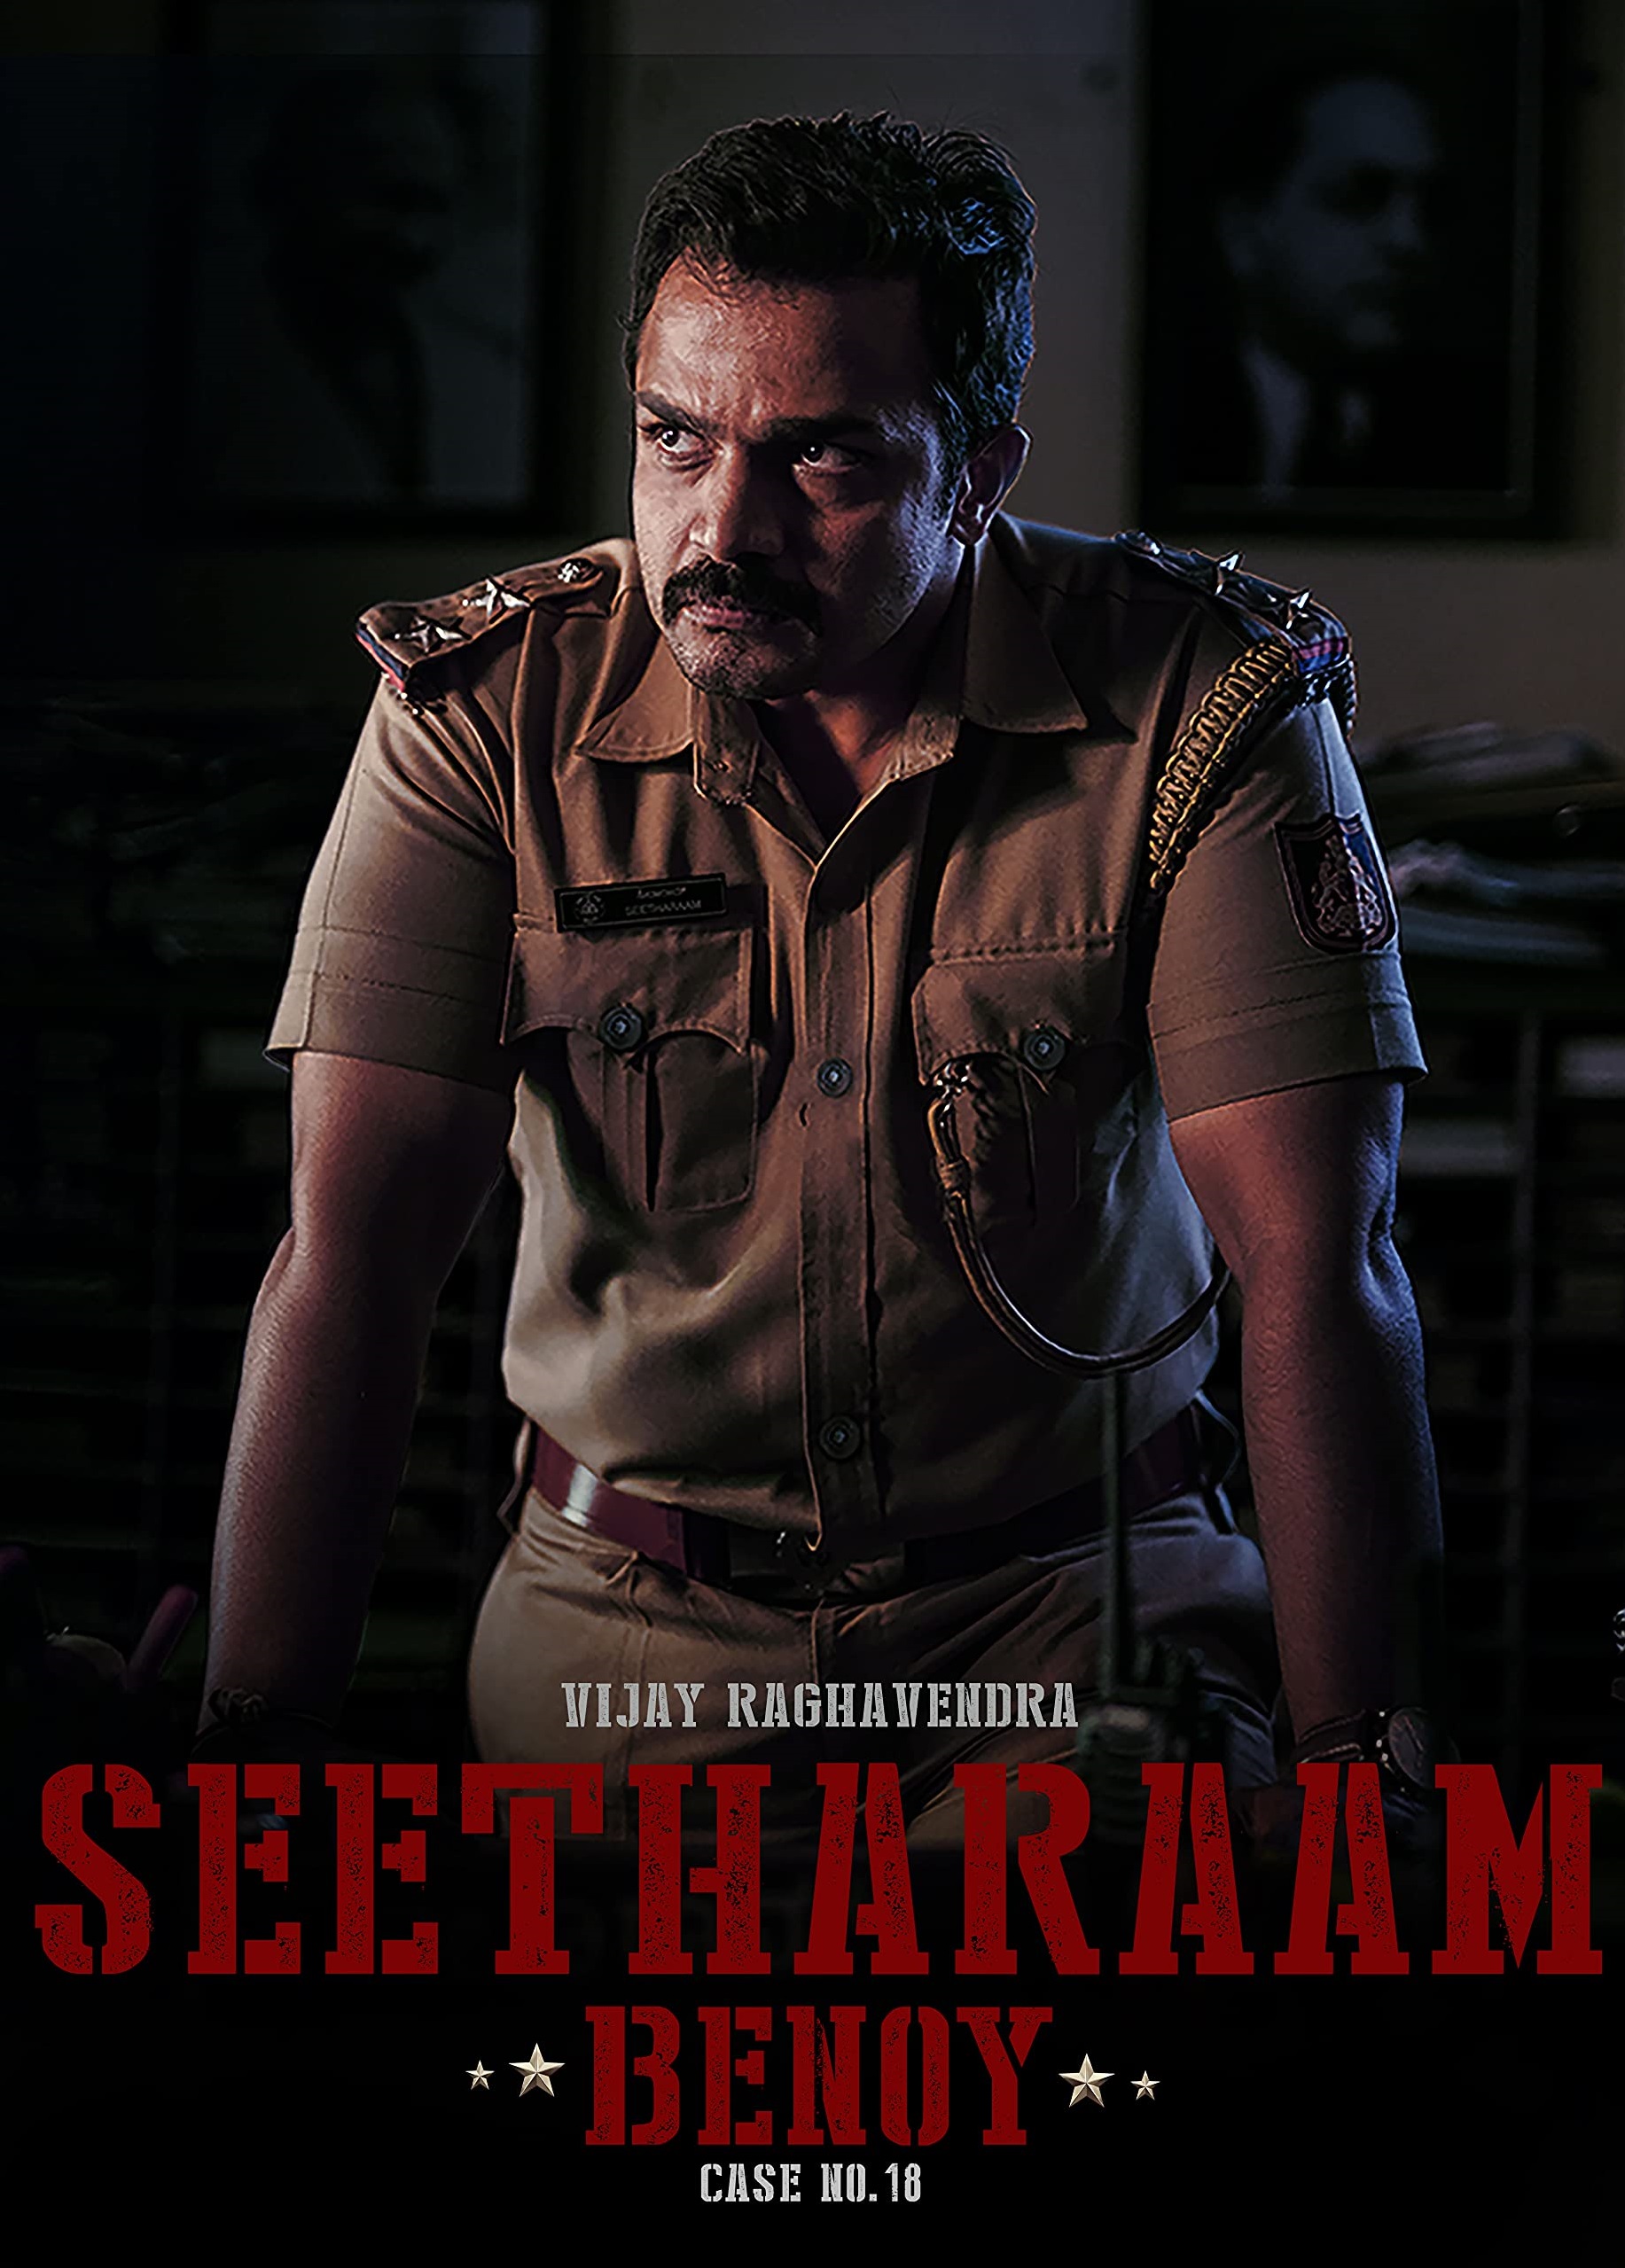 Seetharam Benoy Case No.18 2021 Tamil Dubbed Crime Movie Online